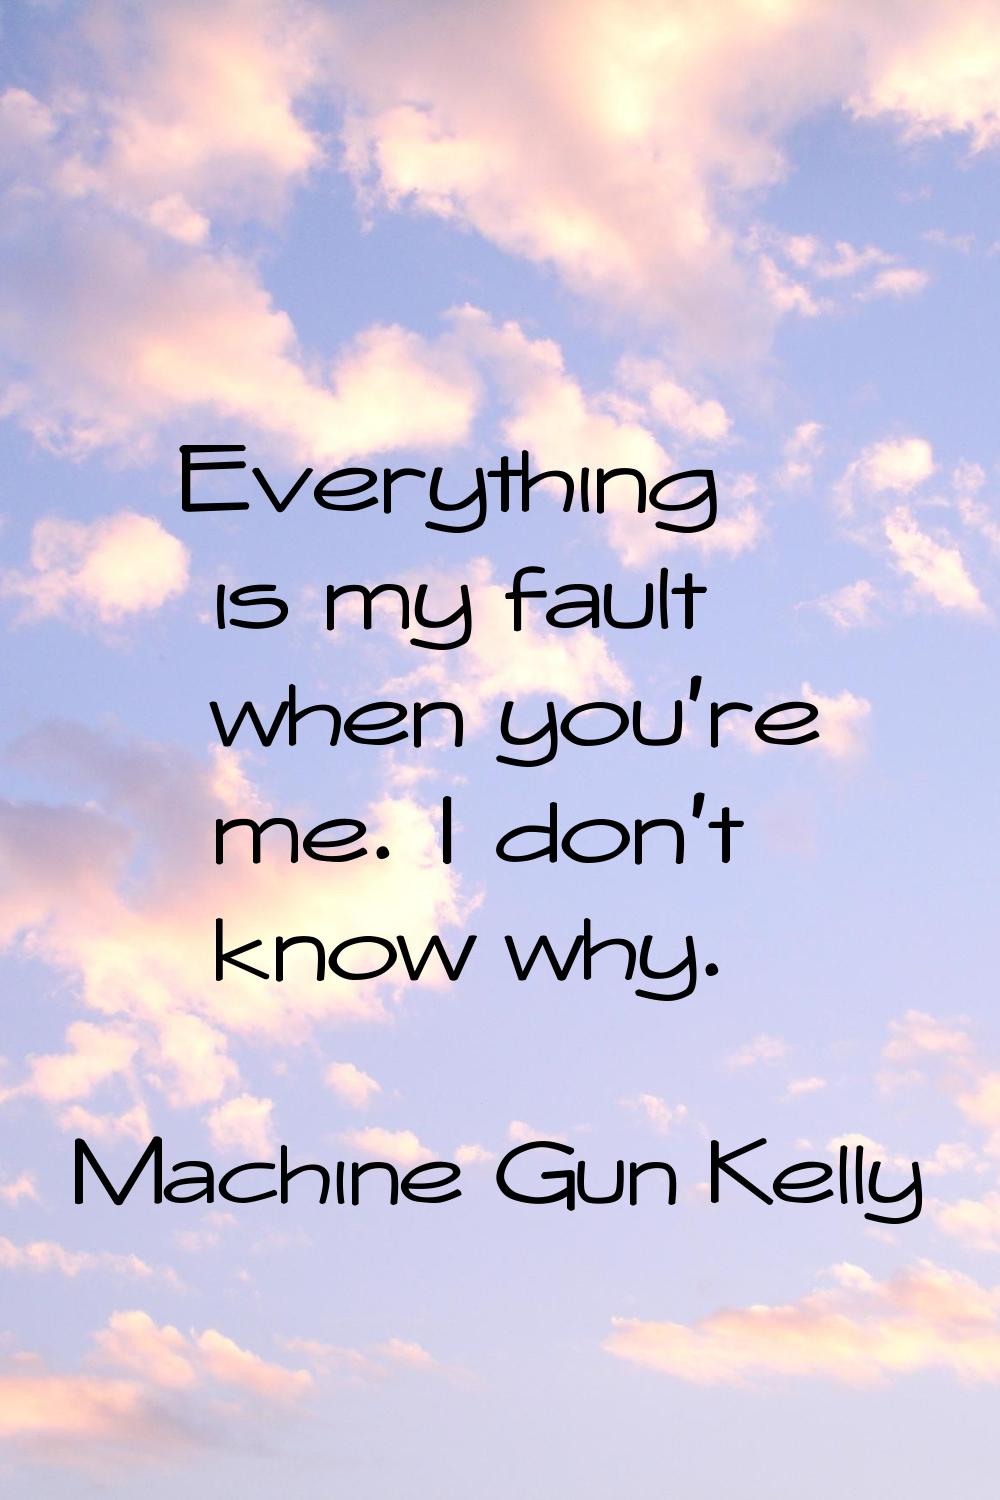 Everything is my fault when you're me. I don't know why.